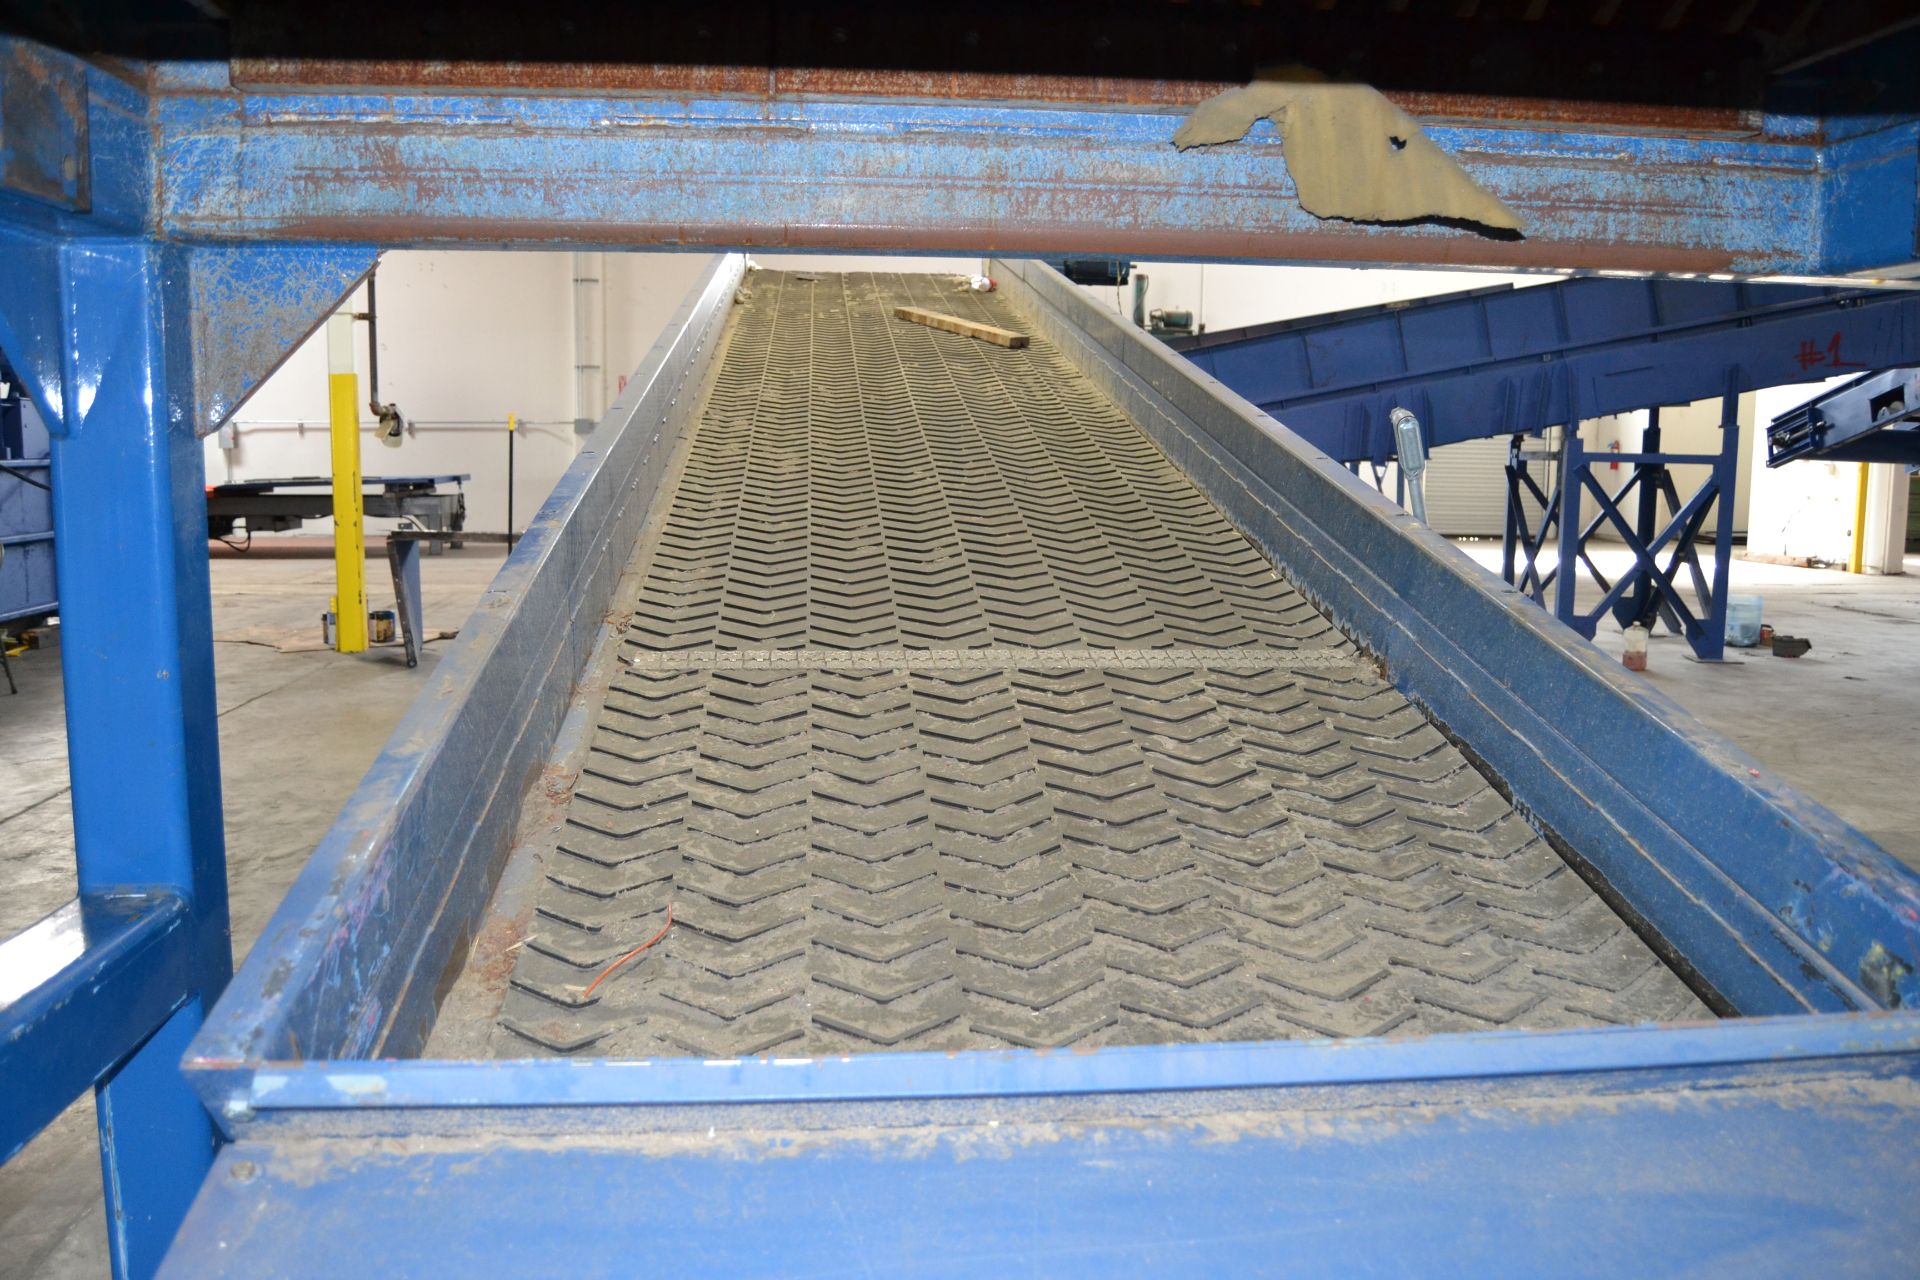 48"W x 25'L Outfeed Conveyor - Image 2 of 2